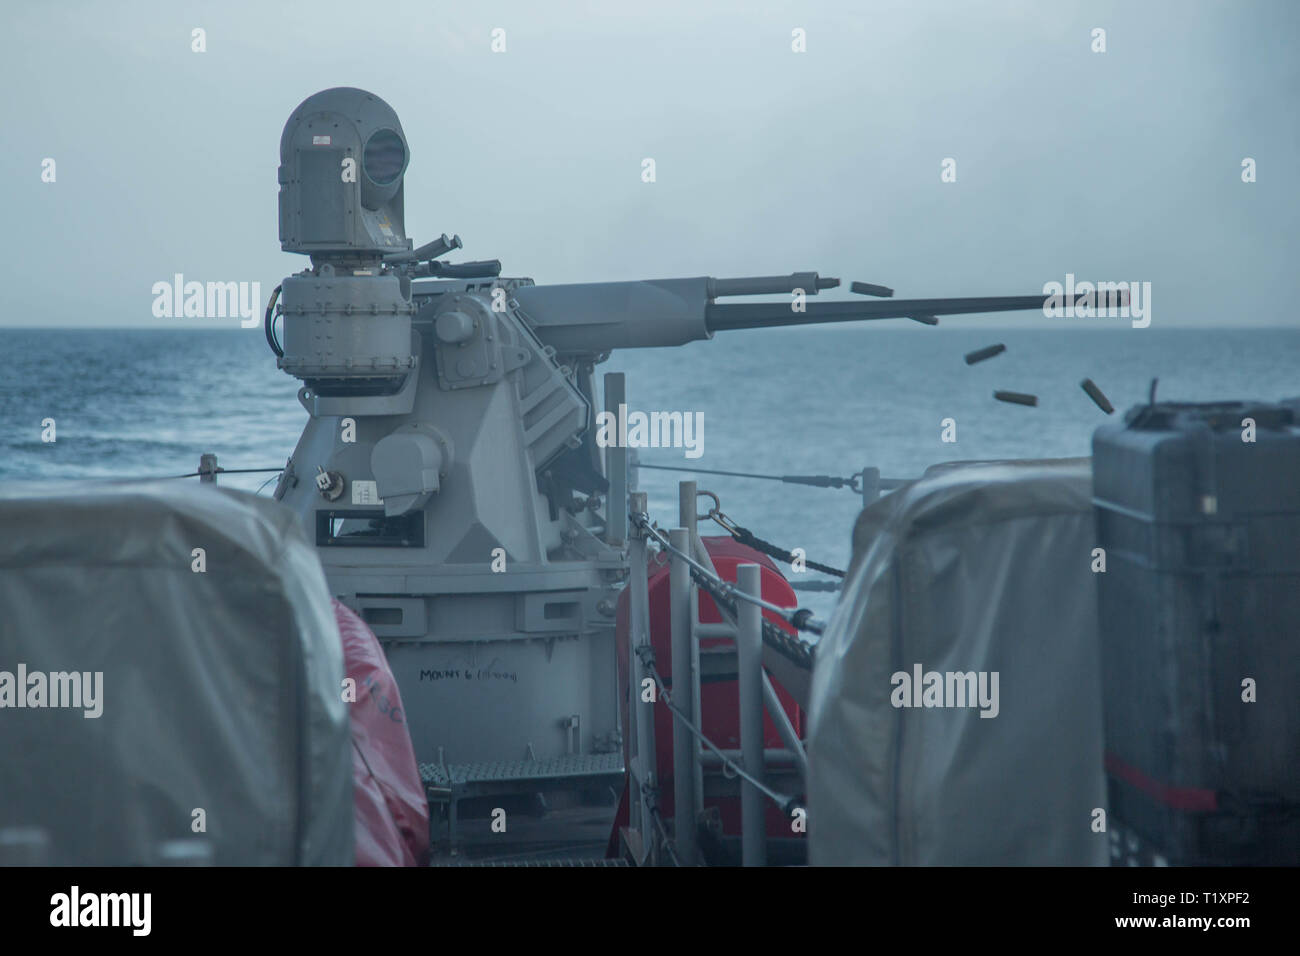 ARABIAN GULF (March 22, 2019) A Mark 38 .25mm machine gun fires during a gunnery exercise aboard the Cyclone-class coastal patrol ship USS Chinook (PC 9). The Chinook is forward-deployed to the U.S. 5th Fleet area of operations to ensure maritime stability and security in the Central Region, connecting the Mediterranean and Pacific through the western Indian Ocean and three strategic choke points. (U.S. Army photo by Spc. Dakota Young/ Released) Stock Photo